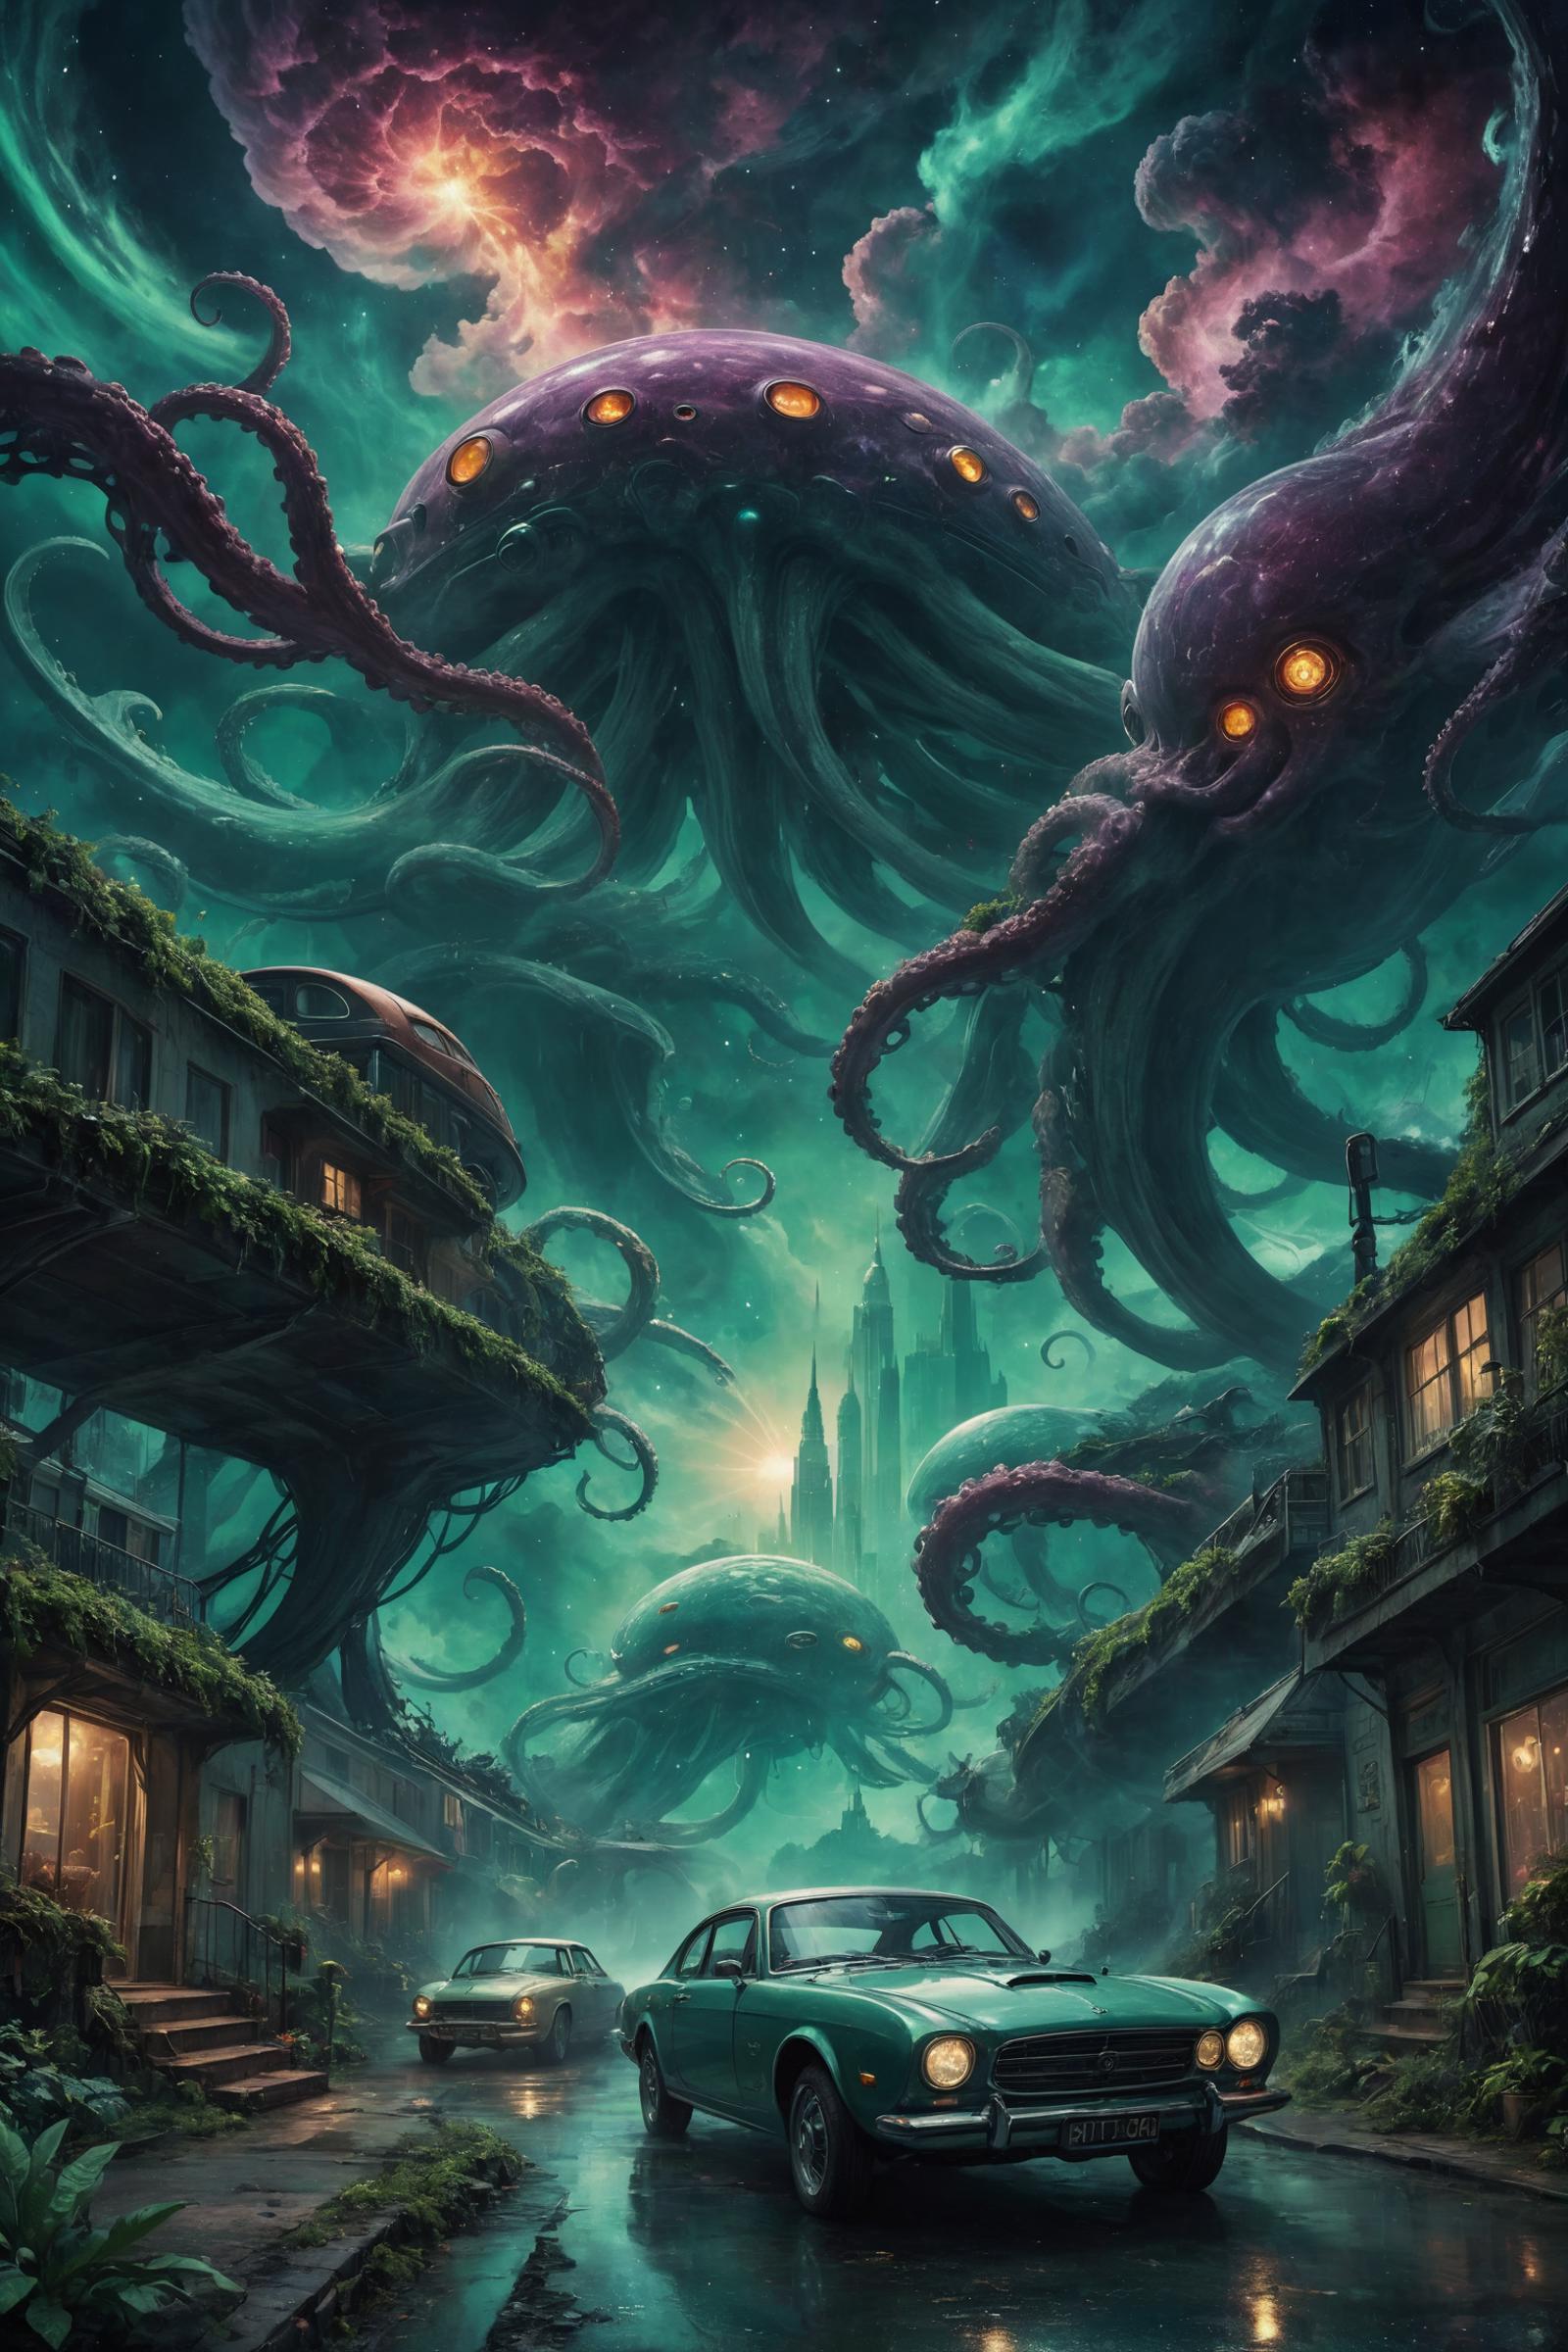 A fantastical painting of monsters, including a giant squid, in a city setting with a car driving through. The artwork is done in a dark, moody style.